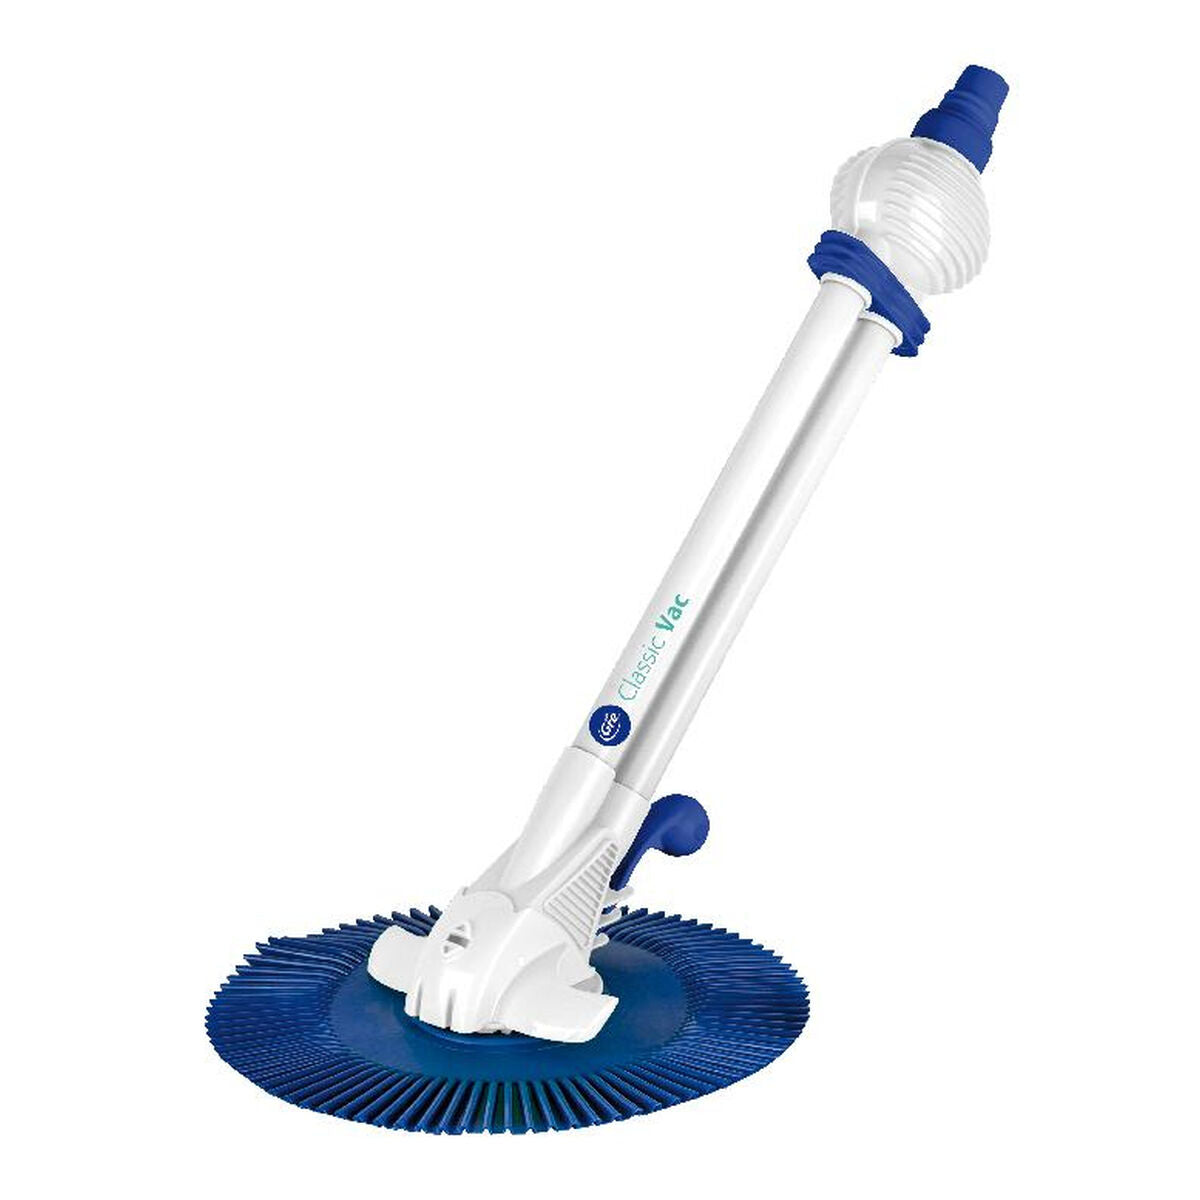 Automatic Pool Cleaners Gre Classic Vac 19001